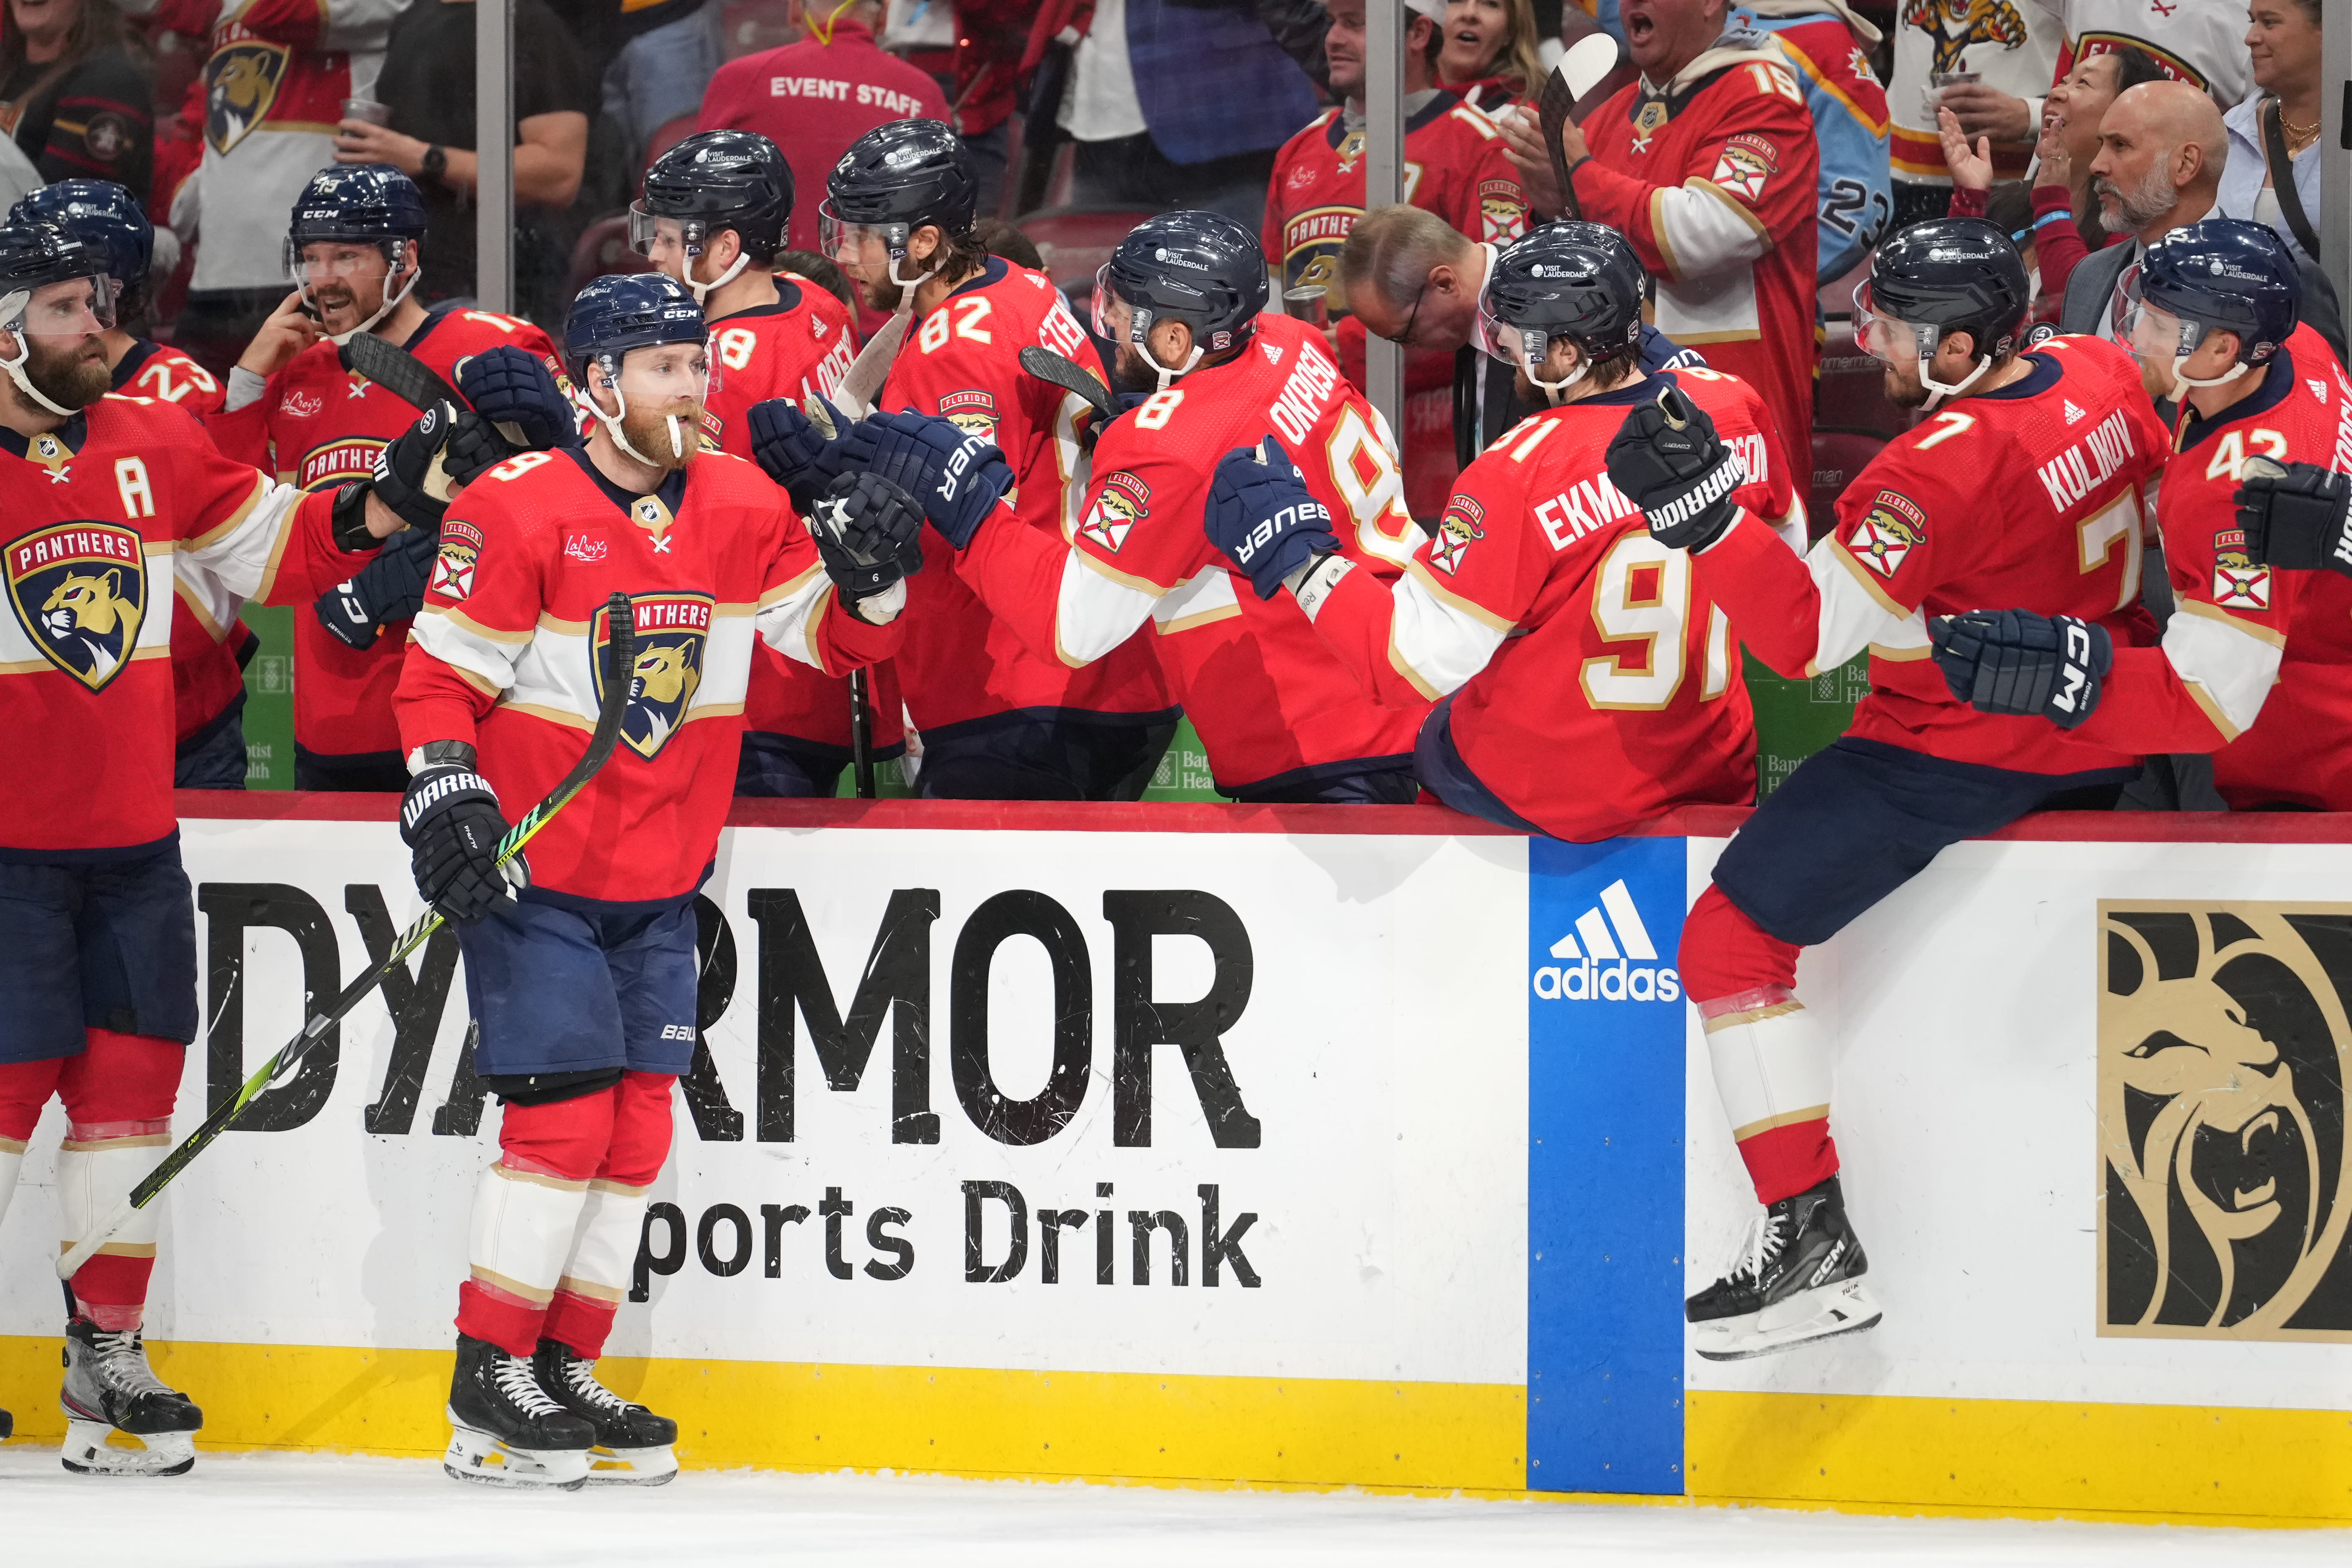 NHL Playoffs: Panthers knock off Rangers to reach 2nd straight Stanley Cup Final